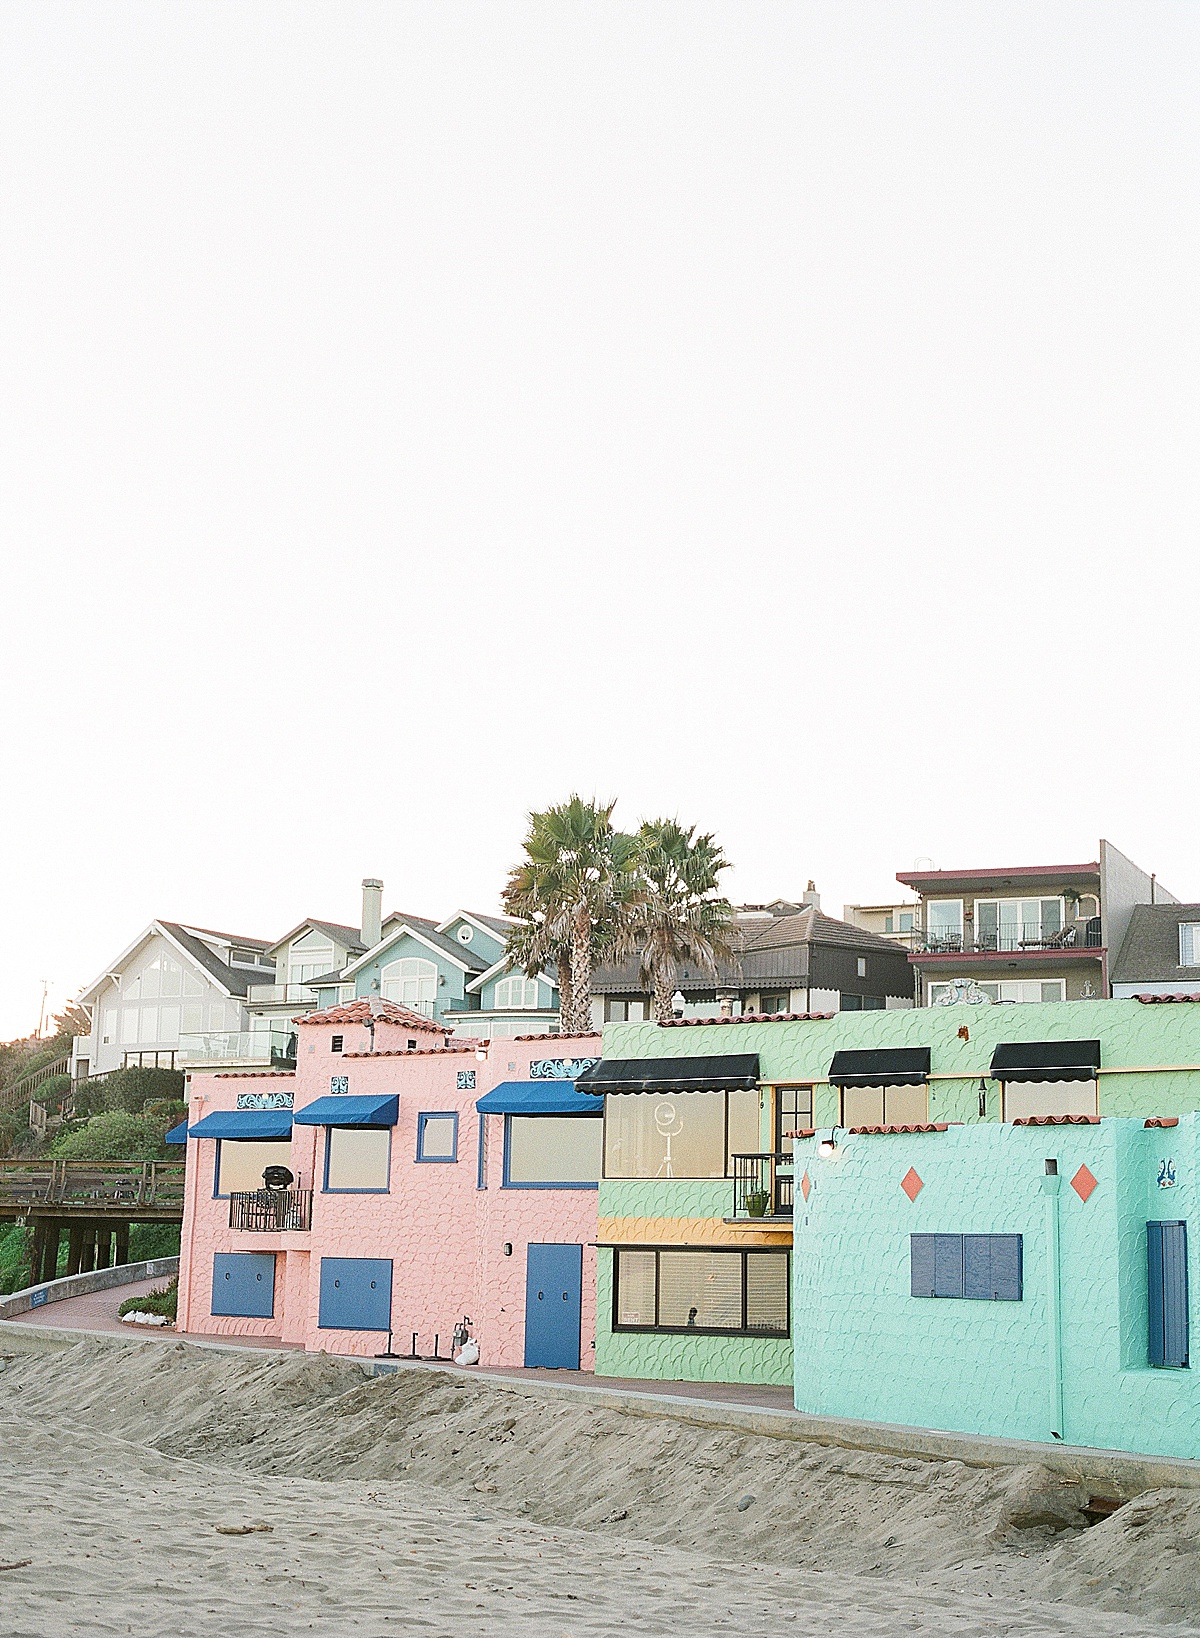 Highway 1 California Capitola Colorful Homes Photo 